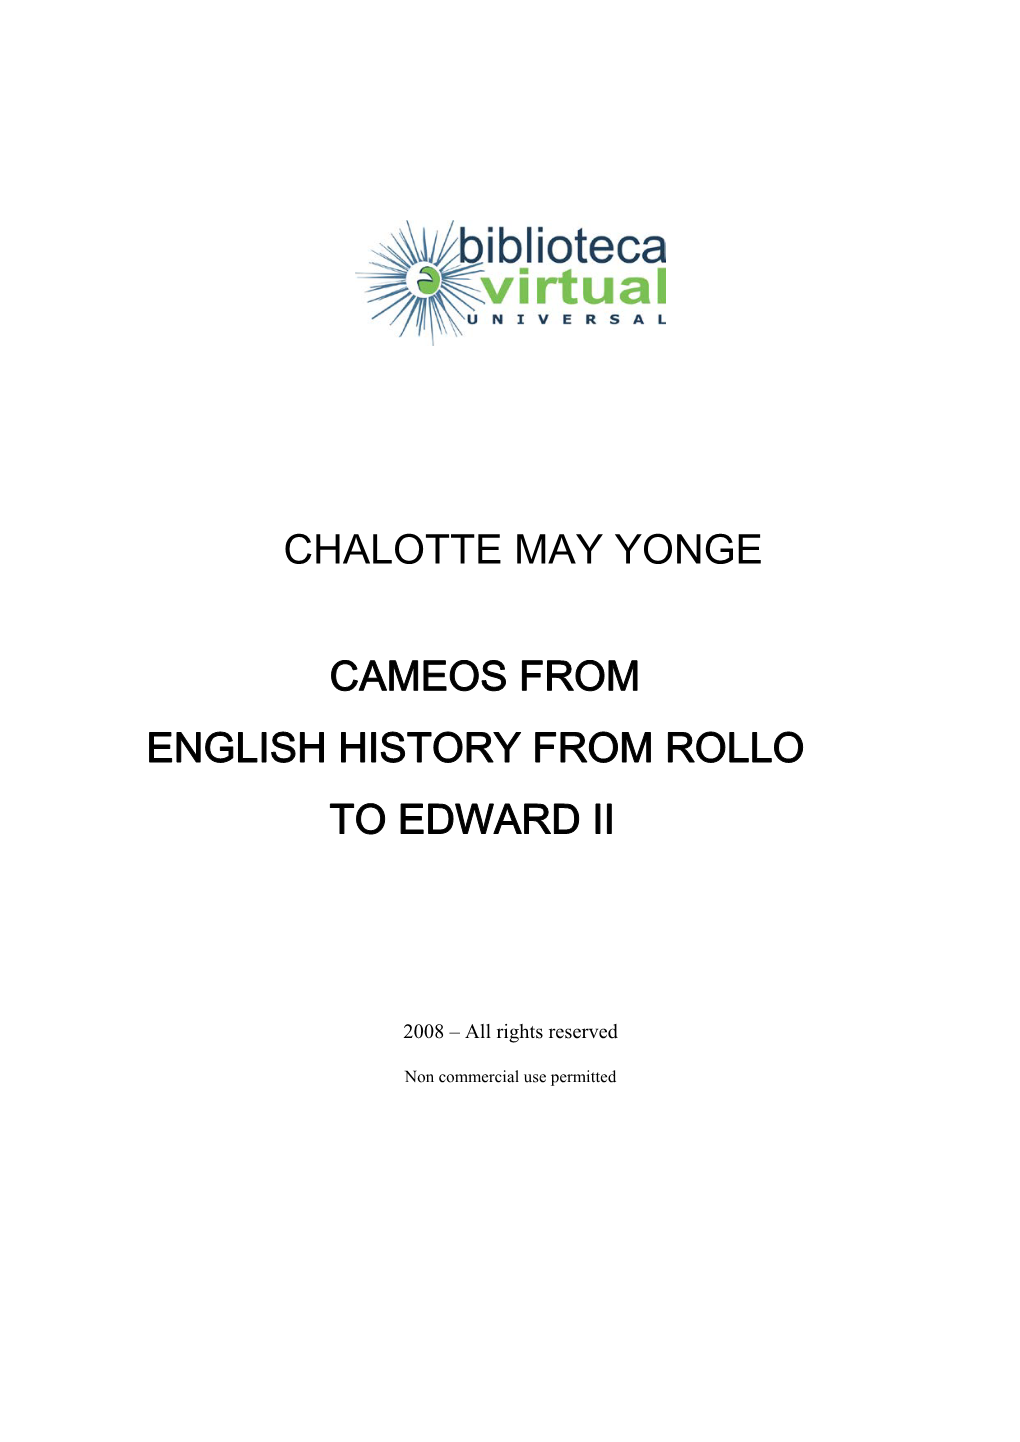 Chalotte May Yonge Cameos from English History from Rollo to Edward Ii